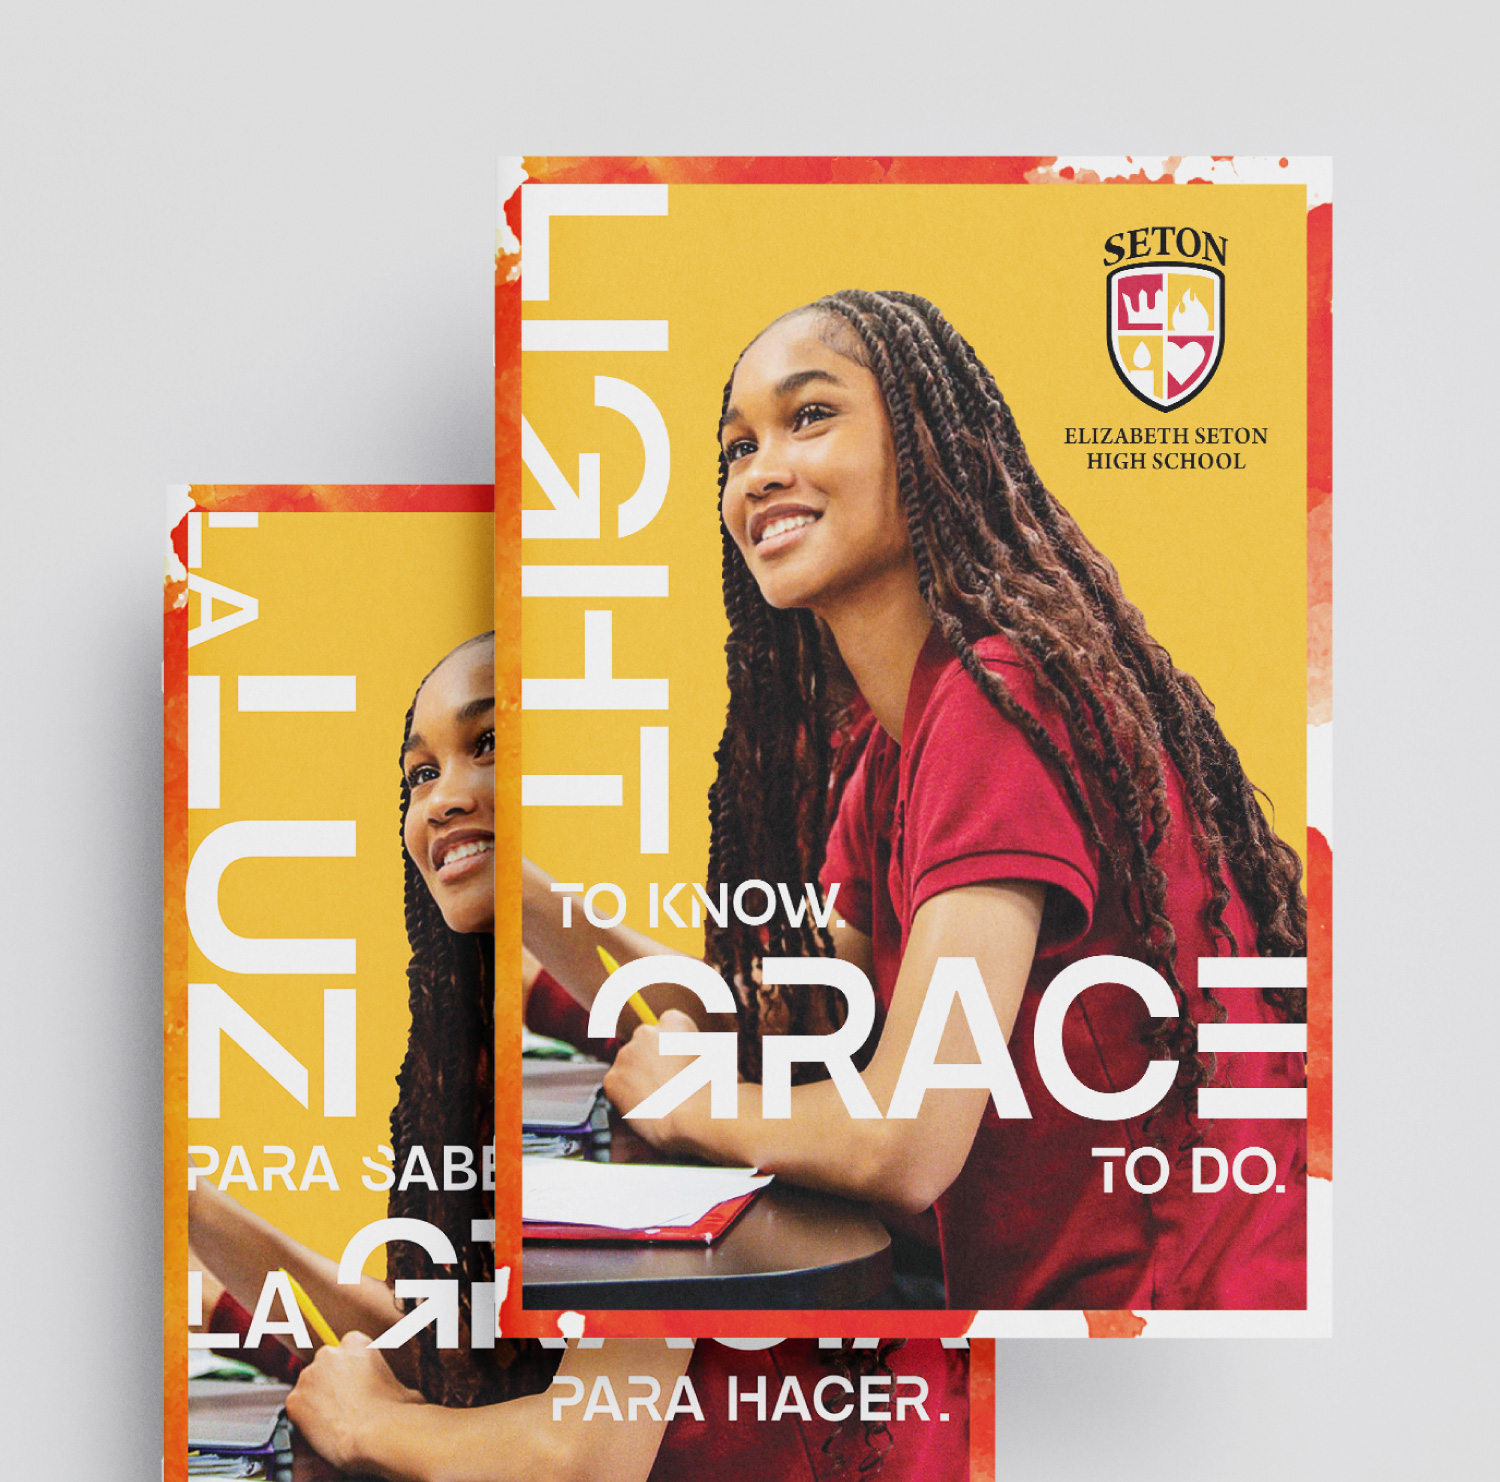 Cover of high school admission materials lookbook in both English and Spanish displaying a photo of a Seton student smiling, the Seton High School crest, and their motto, "Light to Know, Grace to Do."